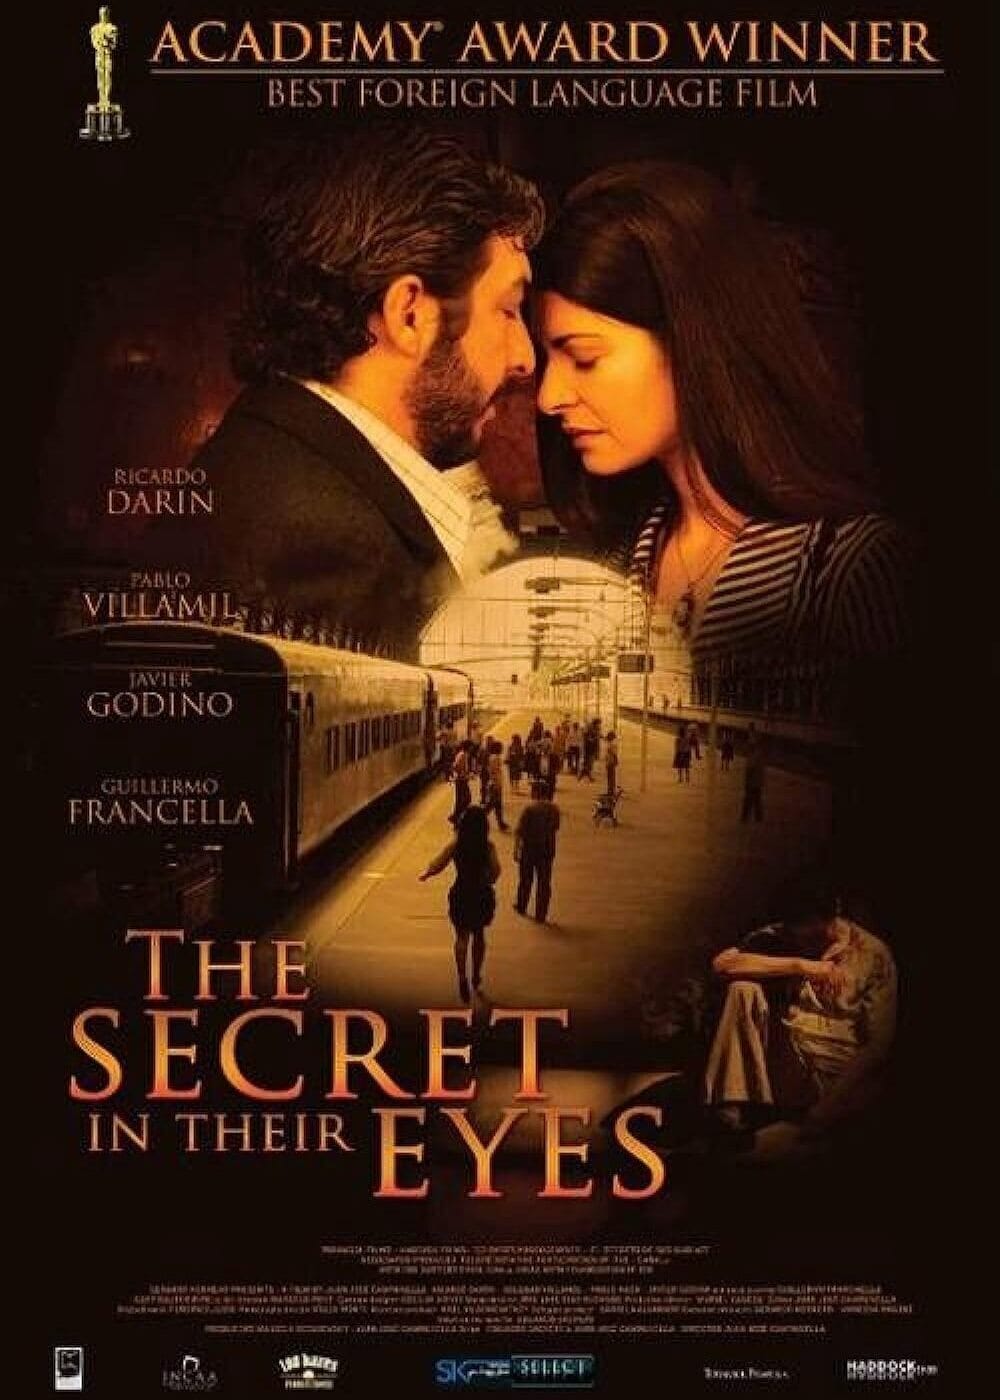 the secret in their eyes movie review